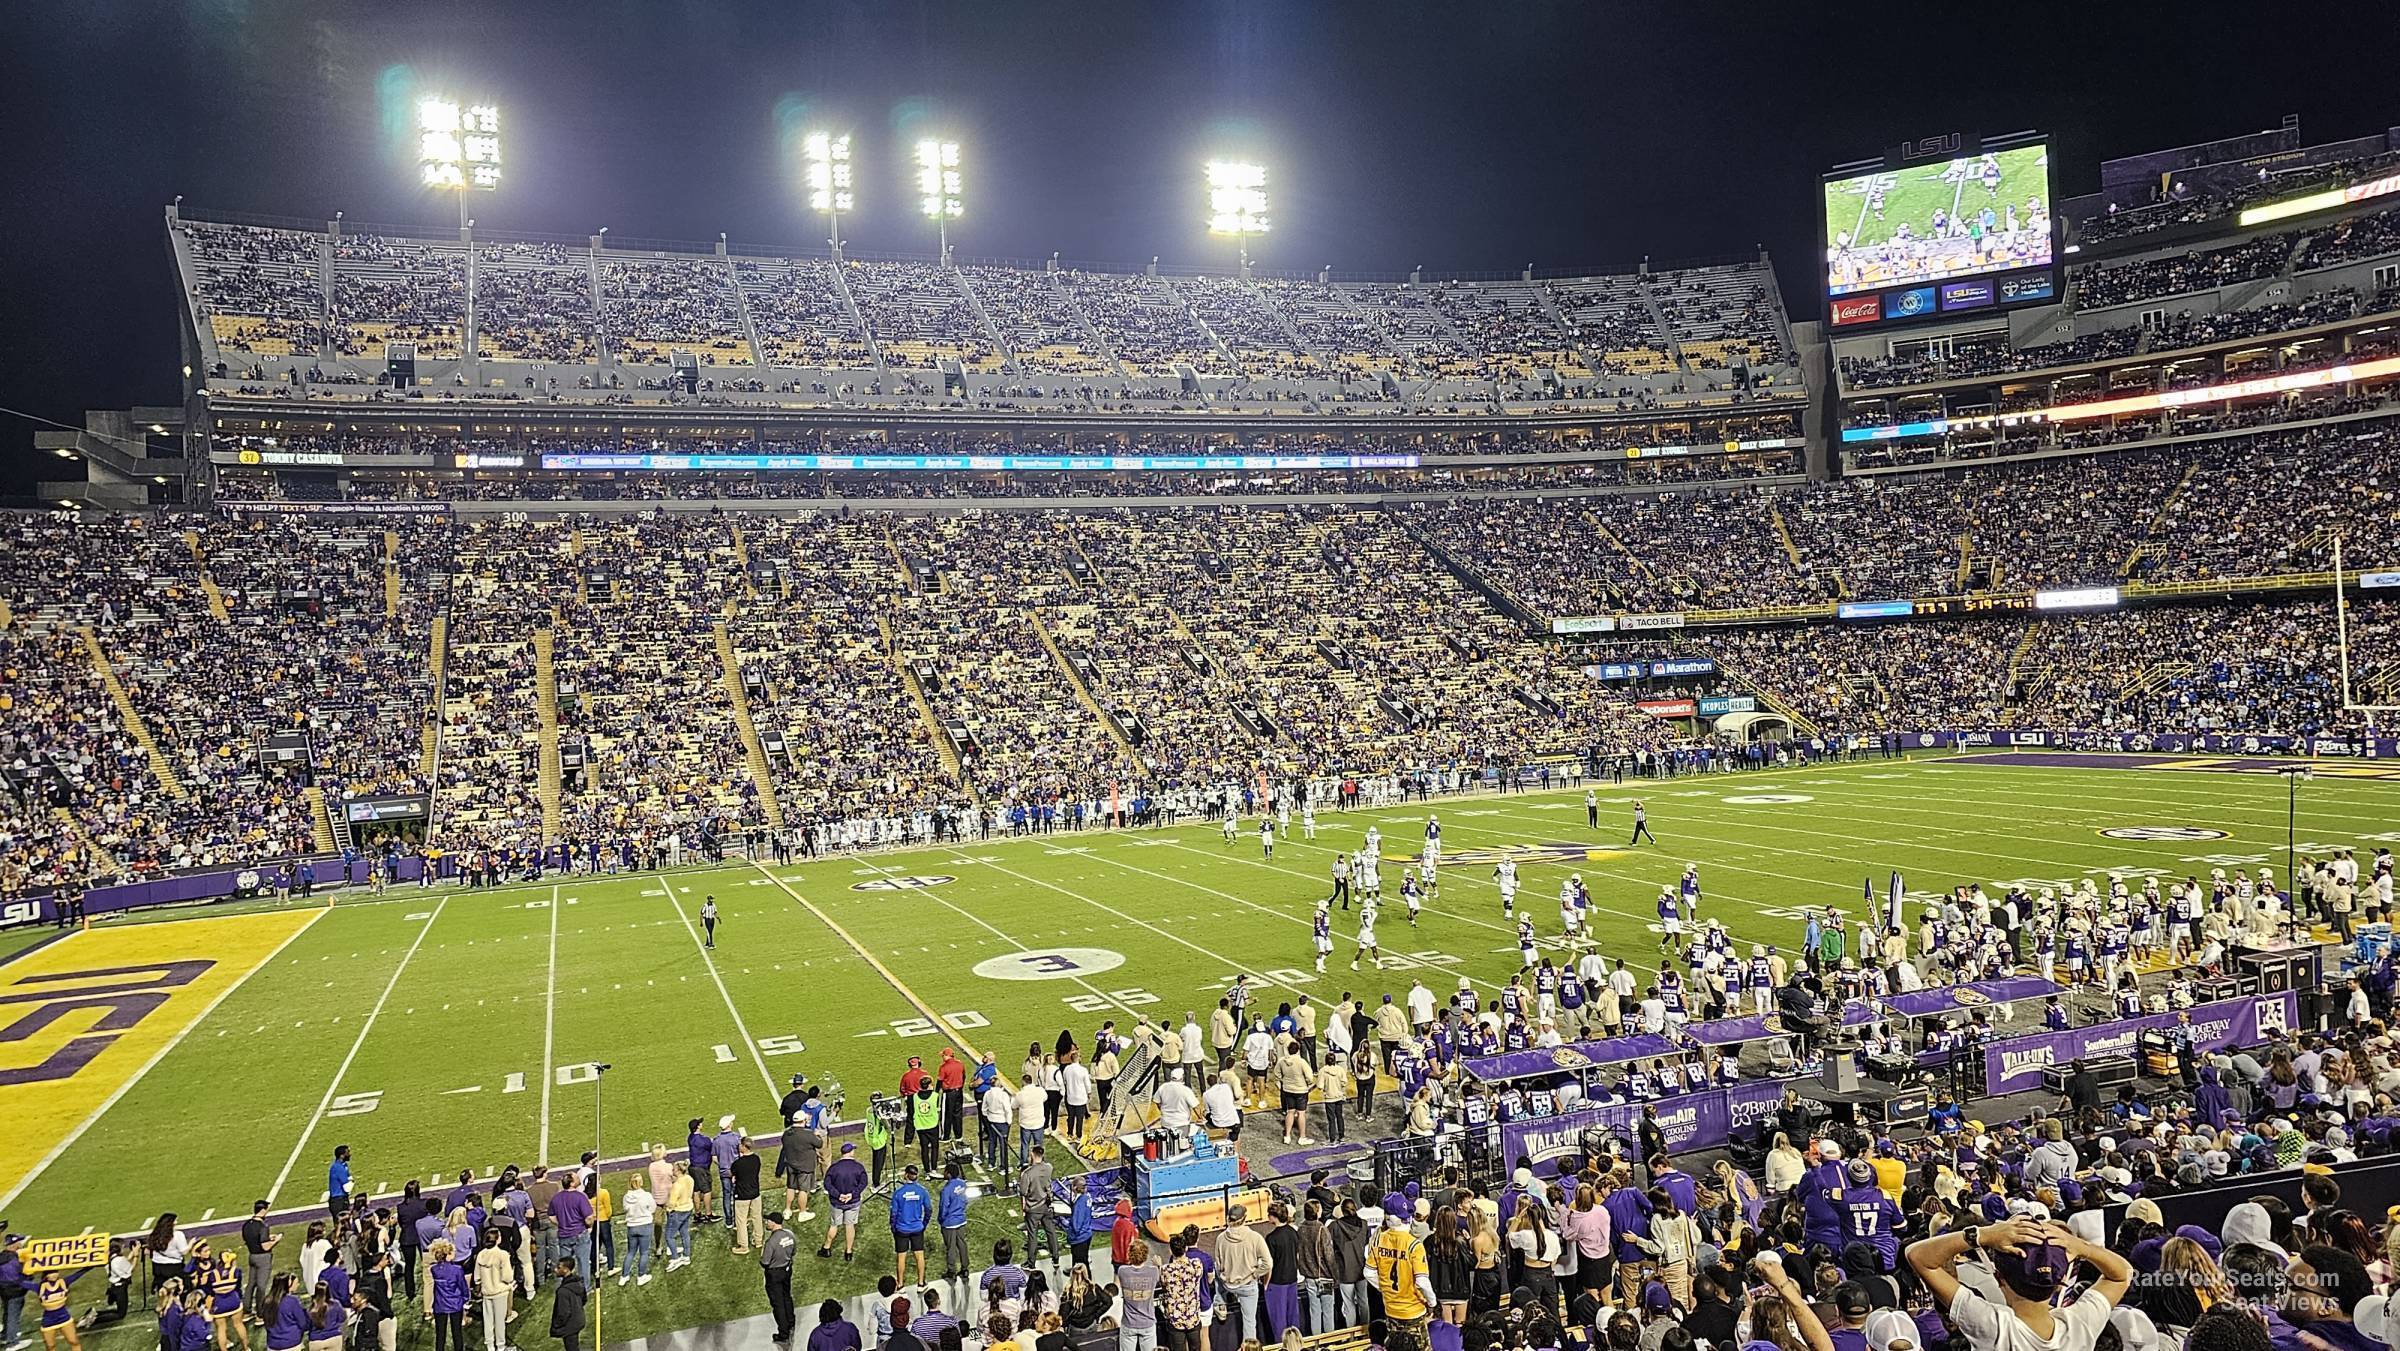 section 106, row 26 seat view  - tiger stadium